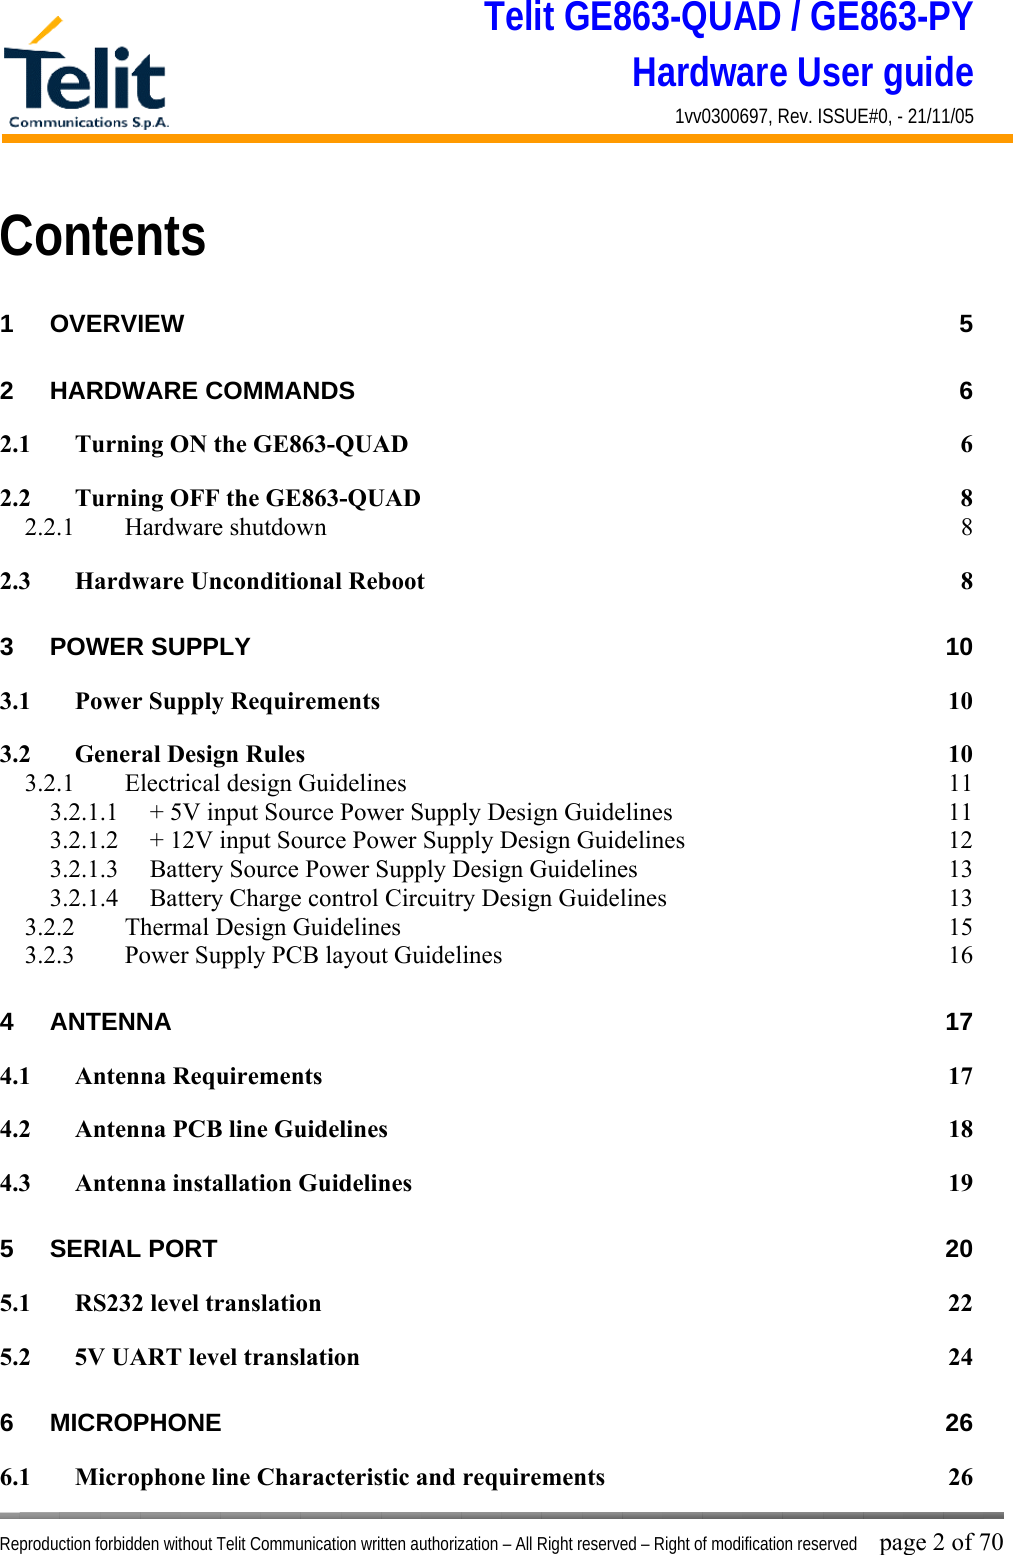 Telit GE863-QUAD / GE863-PY Hardware User guide 1vv0300697, Rev. ISSUE#0, - 21/11/05    Reproduction forbidden without Telit Communication written authorization – All Right reserved – Right of modification reserved page 2 of 70 Contents 1 OVERVIEW 5 2 HARDWARE COMMANDS  6 2.1 Turning ON the GE863-QUAD  6 2.2 Turning OFF the GE863-QUAD  8 2.2.1 Hardware shutdown  8 2.3 Hardware Unconditional Reboot  8 3 POWER SUPPLY  10 3.1 Power Supply Requirements  10 3.2 General Design Rules  10 3.2.1  Electrical design Guidelines  11 3.2.1.1  + 5V input Source Power Supply Design Guidelines  11 3.2.1.2  + 12V input Source Power Supply Design Guidelines  12 3.2.1.3  Battery Source Power Supply Design Guidelines  13 3.2.1.4  Battery Charge control Circuitry Design Guidelines  13 3.2.2  Thermal Design Guidelines  15 3.2.3  Power Supply PCB layout Guidelines  16 4 ANTENNA 17 4.1 Antenna Requirements  17 4.2 Antenna PCB line Guidelines  18 4.3 Antenna installation Guidelines  19 5 SERIAL PORT  20 5.1 RS232 level translation  22 5.2 5V UART level translation  24 6 MICROPHONE 26 6.1 Microphone line Characteristic and requirements  26 